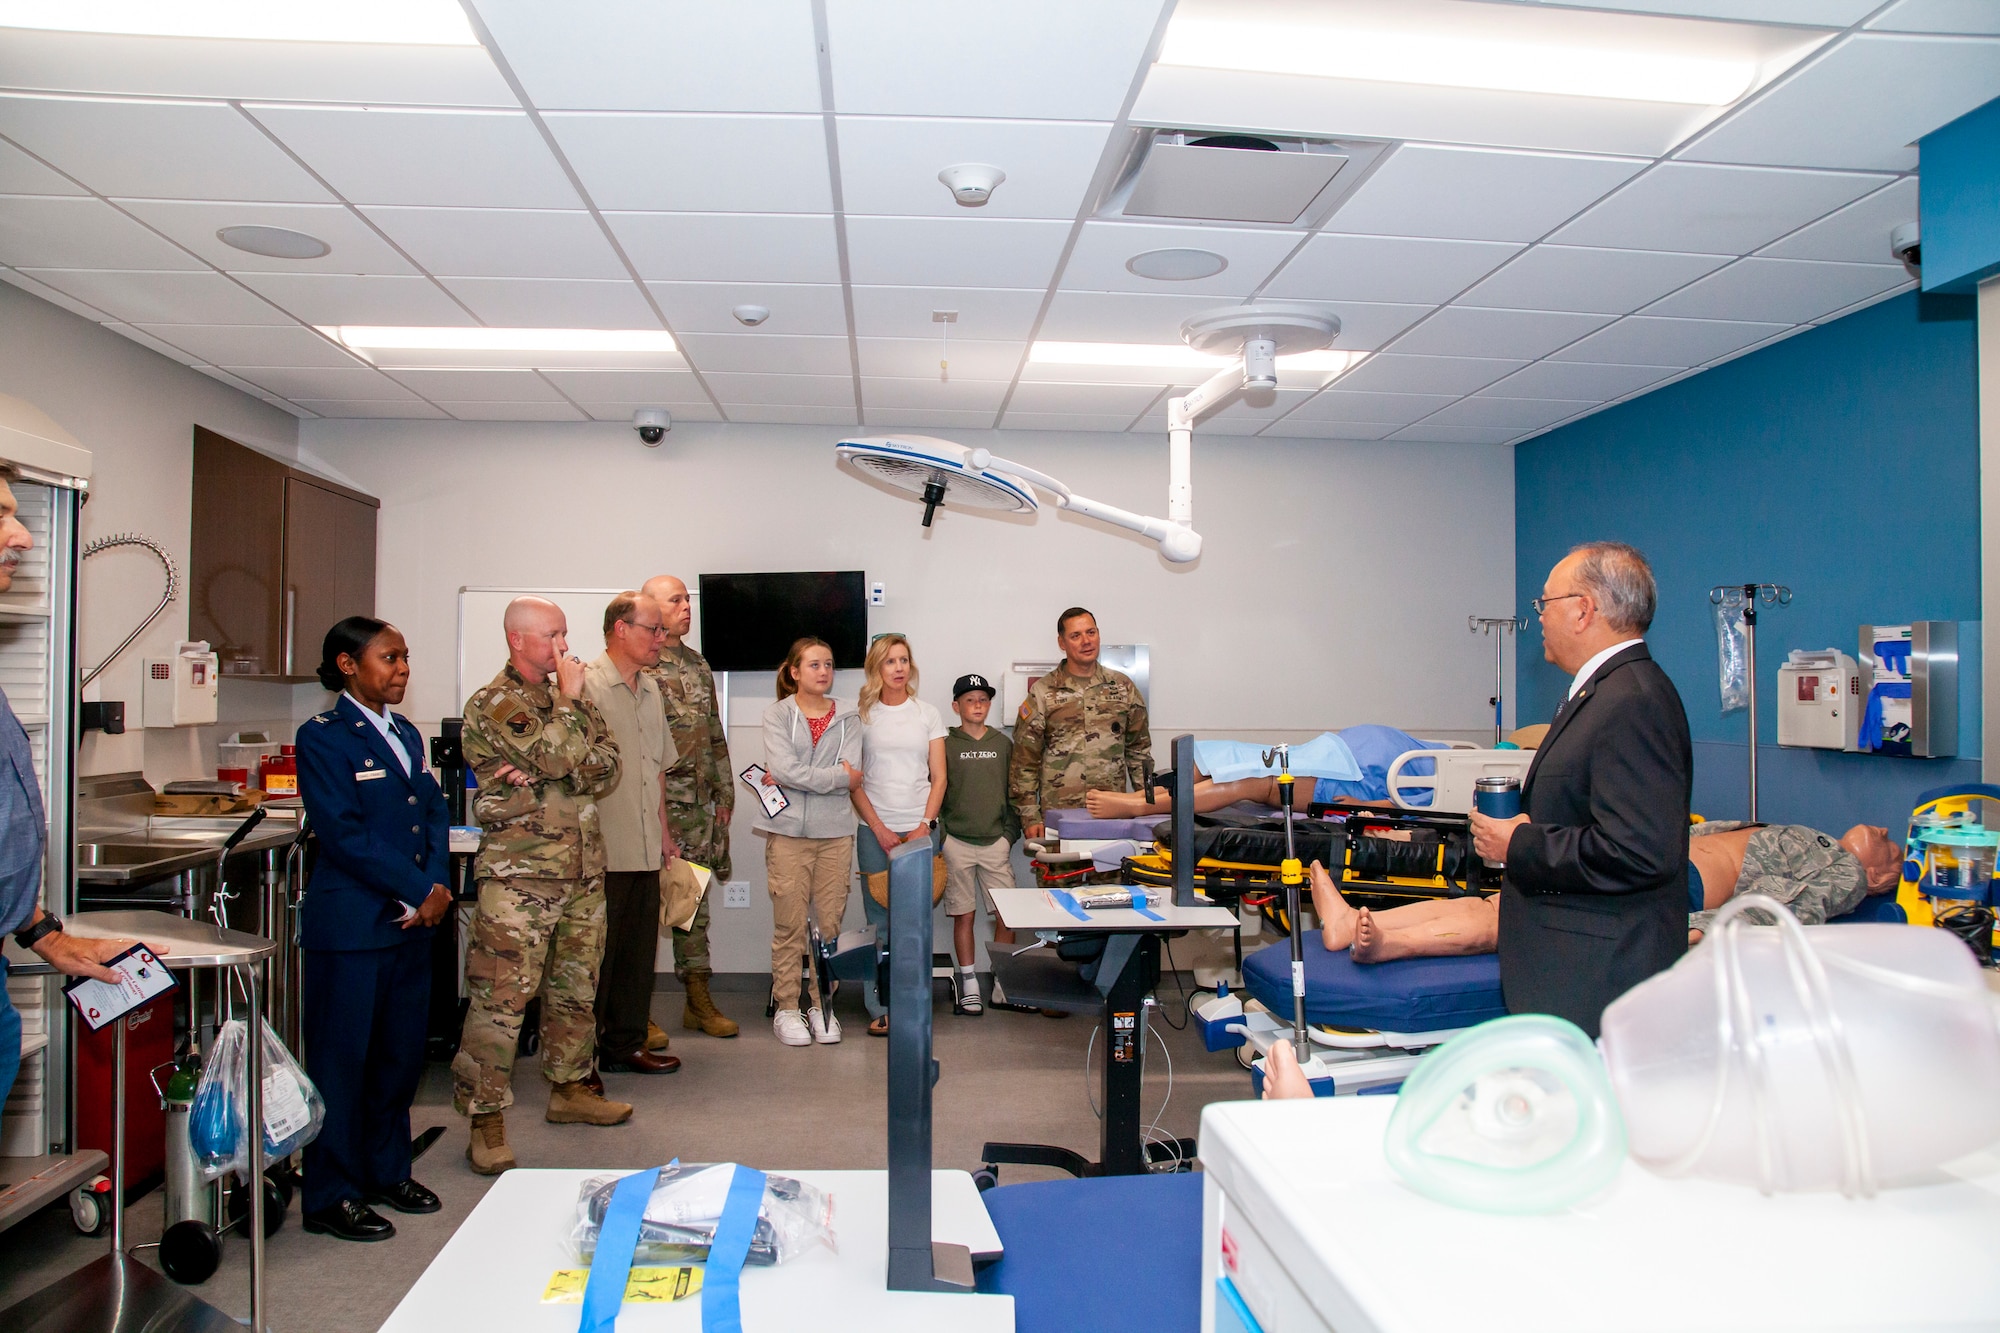 Chris Borja, 412th Medical Group Facility Manager provides a tour of the new training simulation lab on Edwards Air Force Base, California, June 1. The training facility provides state-of-the-art training simulation for Edwards medical responders as well local partners. (Air Force photo by Carla Escamilla)